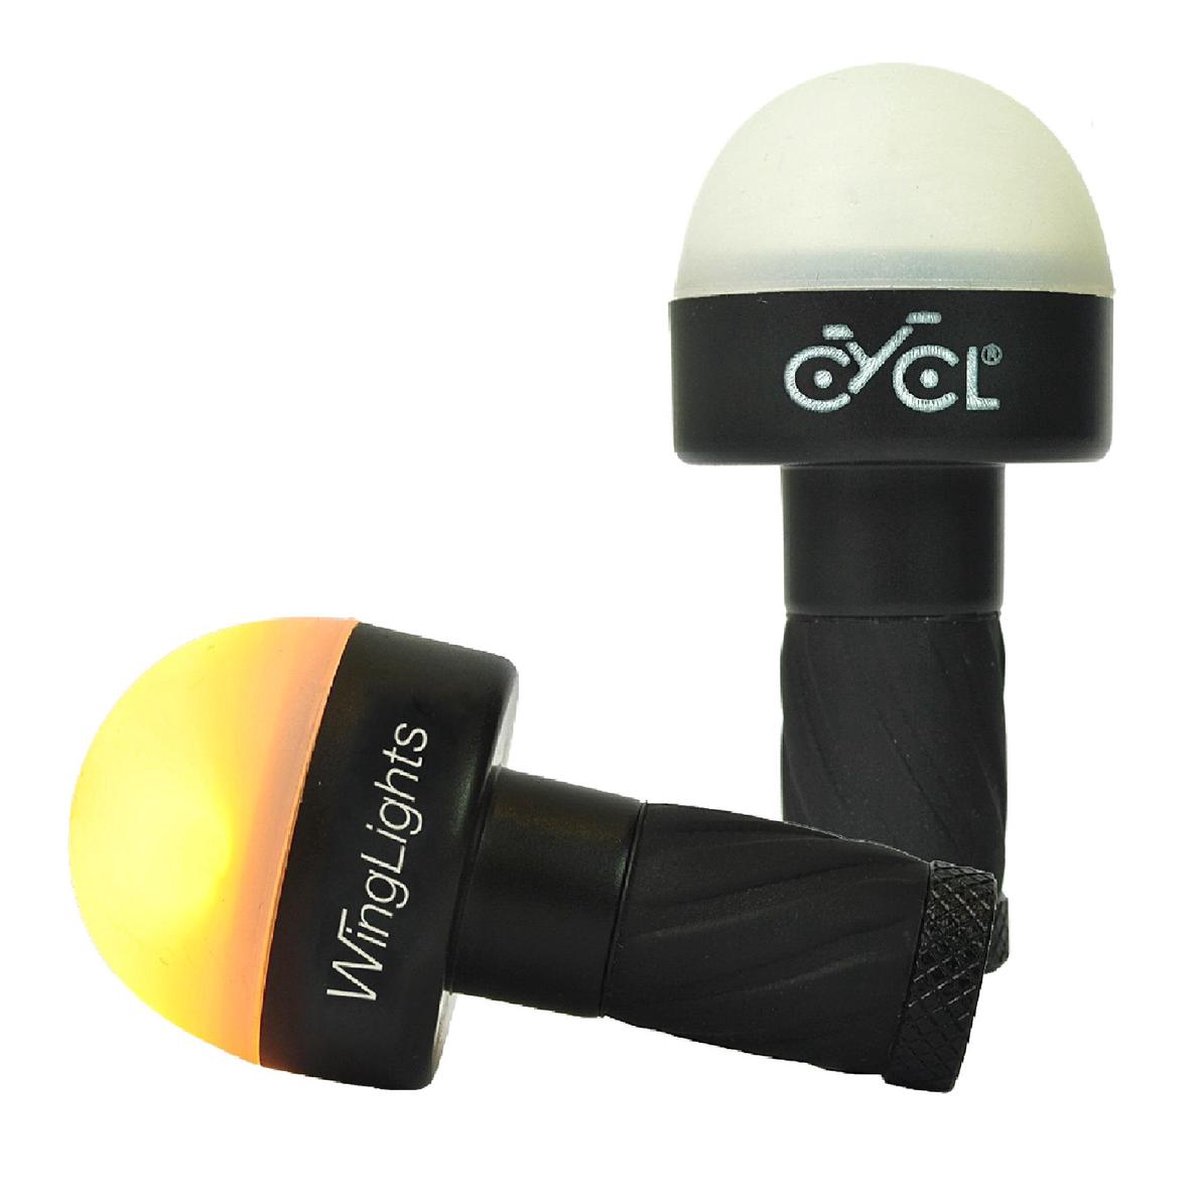 CYCL Wing Lights POP CYCL Wing Lights POP are extremely handy direction indicators with LED lights for the handlebars of your bike. The LED lights flash in a bright amber light and you are 360 degrees visible to all other road users in all weather conditions. Attach the Wing Lights easily by mounting them in the side of your handlebar. The Wing Light POP are 100% waterproof and come with 2 x CR2032 high quality batteries per unit. And to save battery life they automatically turn off after 45 seconds.